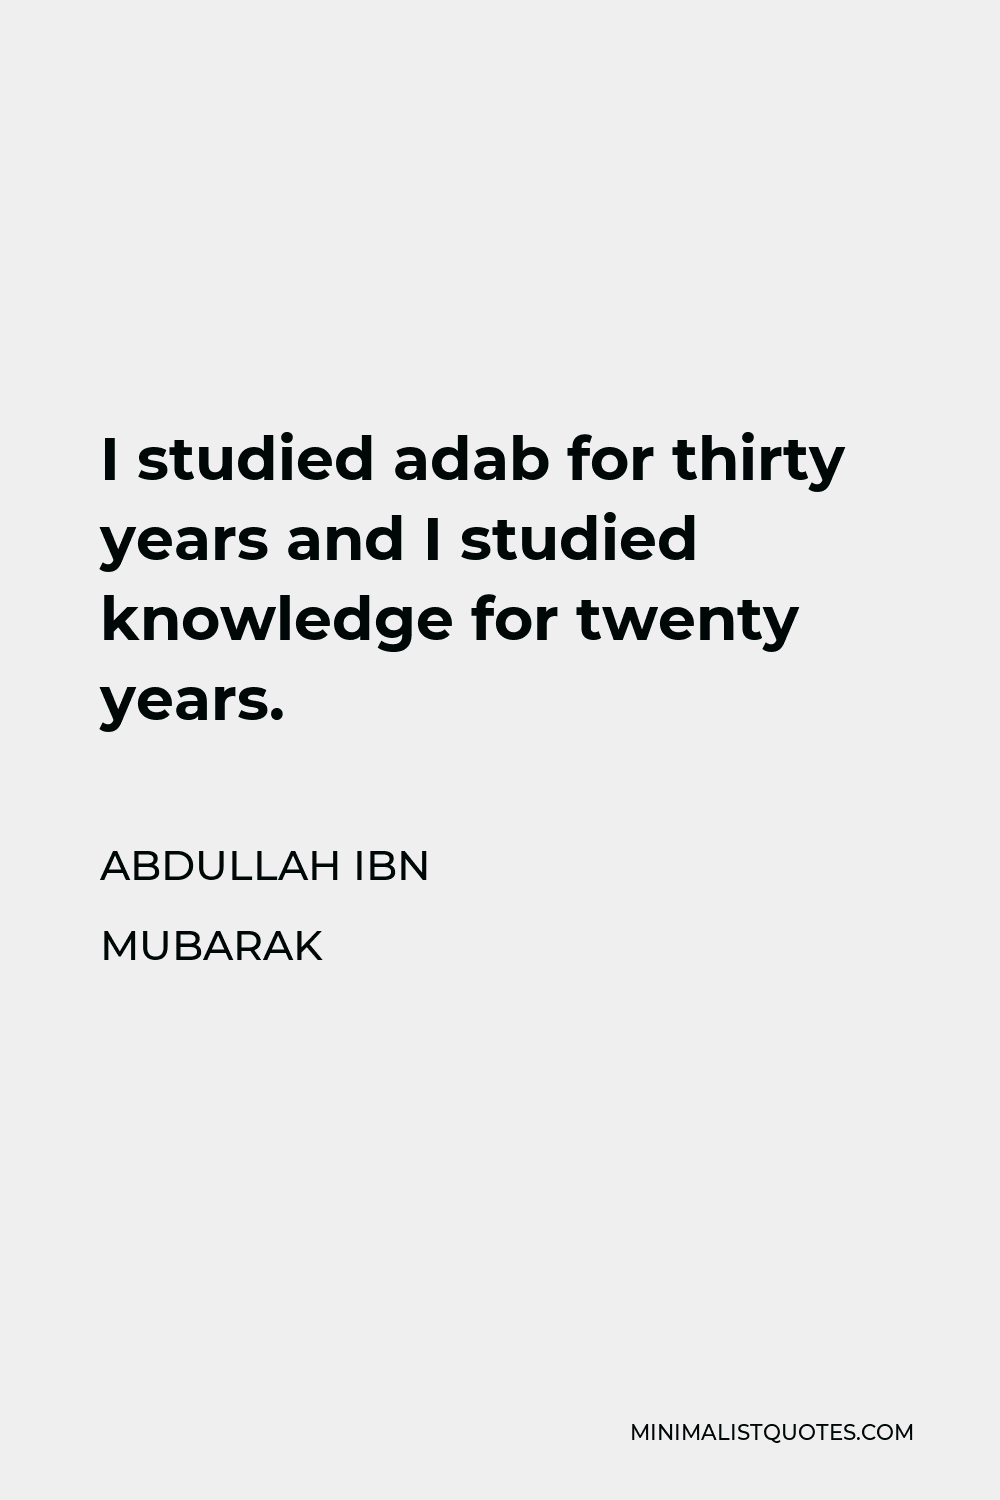 Abdullah ibn Mubarak Quote - I studied adab for thirty years and I studied knowledge for twenty years.